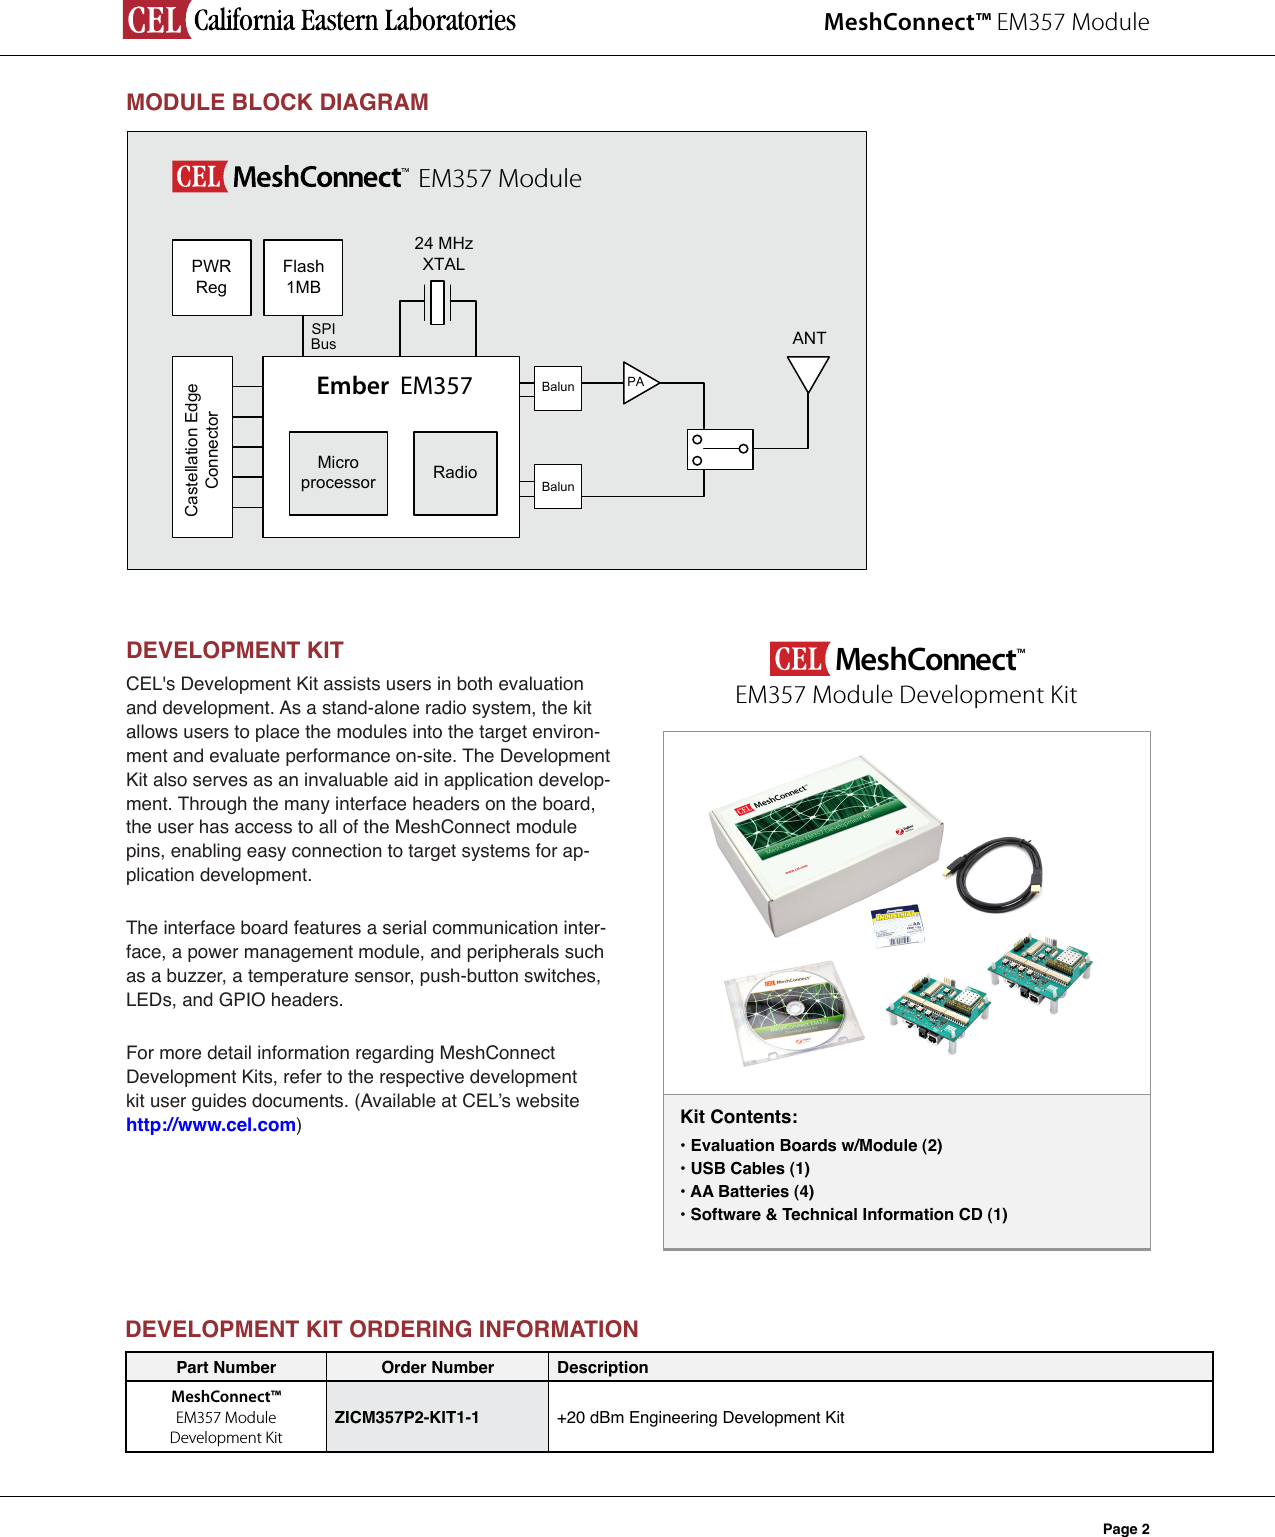 MeshConnect™ EM357 ModulePage 2MODULEBLOCKDIAGRAM24 MHz XTALRadioMicroprocessor ANTCastellation Edge ConnectorPWR RegFlash1MBEmber  EM357EM357 ModuleBalun PABalunSPIBusDEVELOPMENTKITCEL&apos;s Development Kit assists users in both evaluation and development. As a stand-alone radio system, the kit allows users to place the modules into the target environ-ment and evaluate performance on-site. The Development Kit also serves as an invaluable aid in application develop-ment. Through the many interface headers on the board, the user has access to all of the MeshConnect module pins, enabling easy connection to target systems for ap-plication development. The interface board features a serial communication inter-face, a power management module, and peripherals such as a buzzer, a temperature sensor, push-button switches, LEDs, and GPIO headers.  For more detail information regarding MeshConnect Development Kits, refer to the respective development kit user guides documents. (Available at CEL’s website http://www.cel.com)Kit Contents:•EvaluationBoardsw/Module(2)•USBCables(1)•AABatteries(4)•Software&amp;TechnicalInformationCD(1)MeshConnect™ EM357 Module Development KitDEVELOPMENTKITORDERINGINFORMATIONPart Number Order Number DescriptionMeshConnect™  EM357 Module  Development KitZICM357P2-KIT1-1 +20 dBm Engineering Development Kit